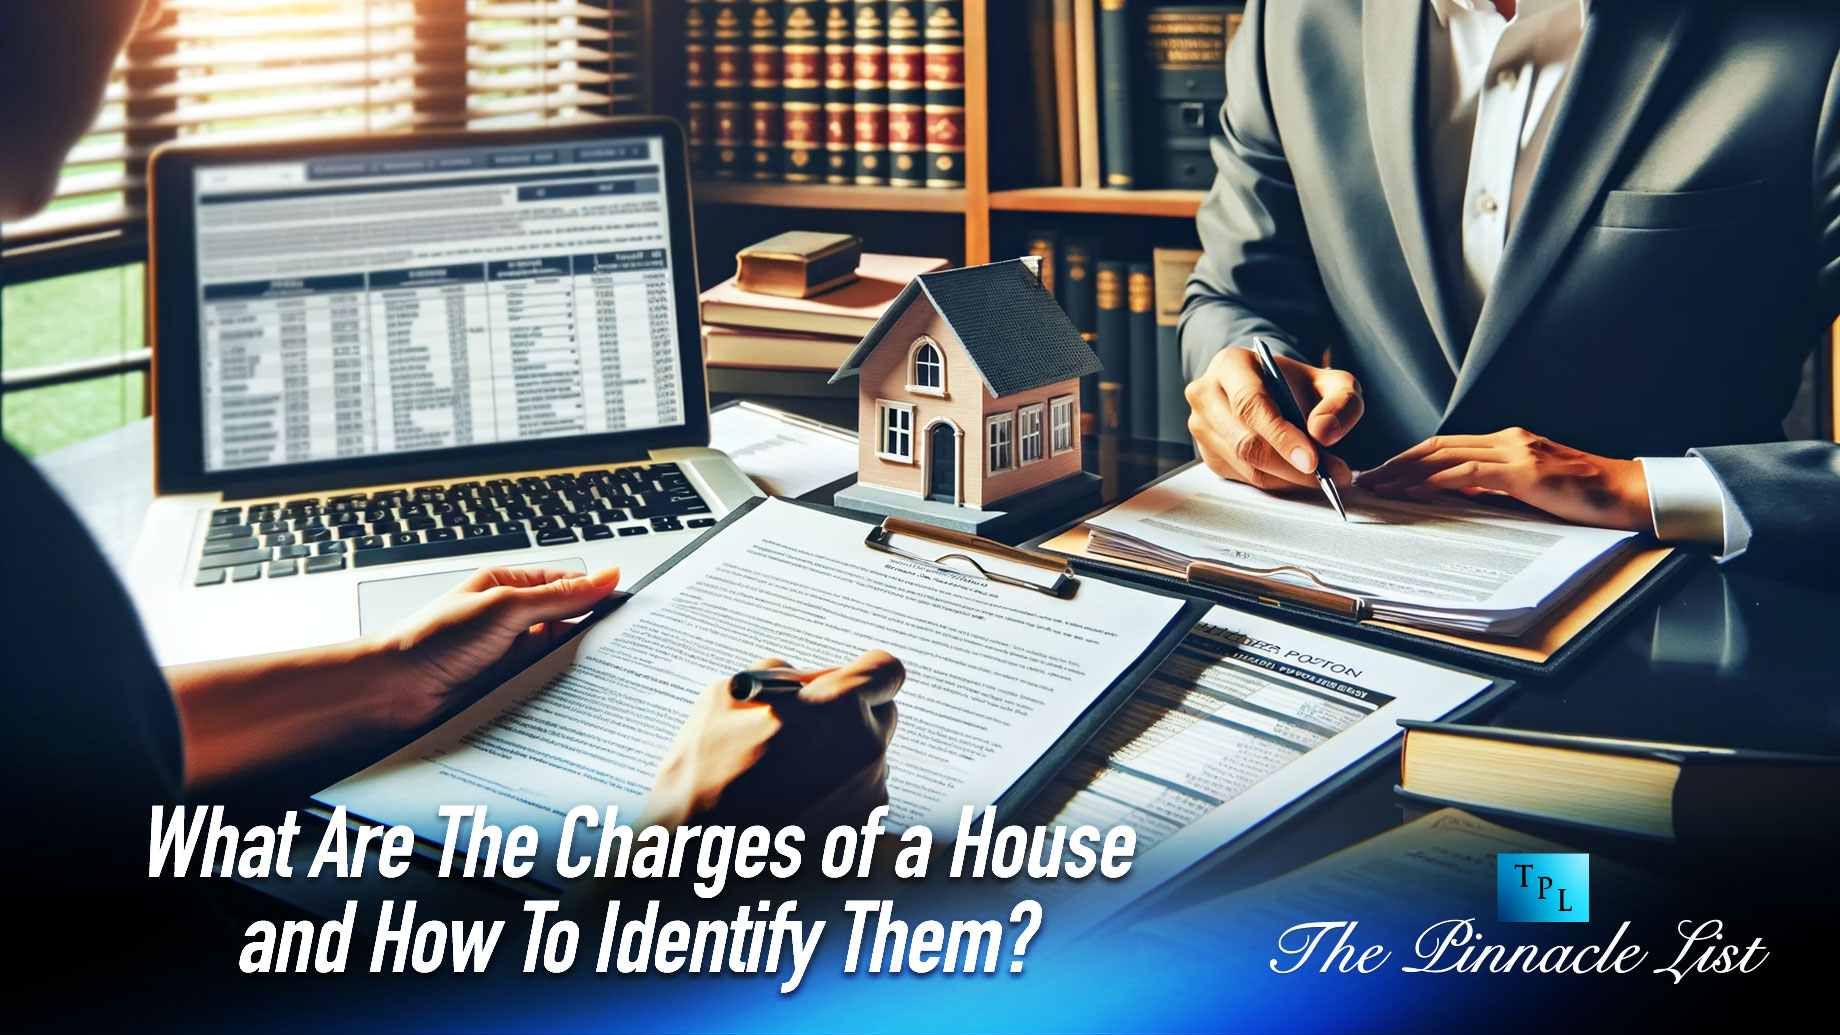 What Are The Charges of a House and How To Identify Them?